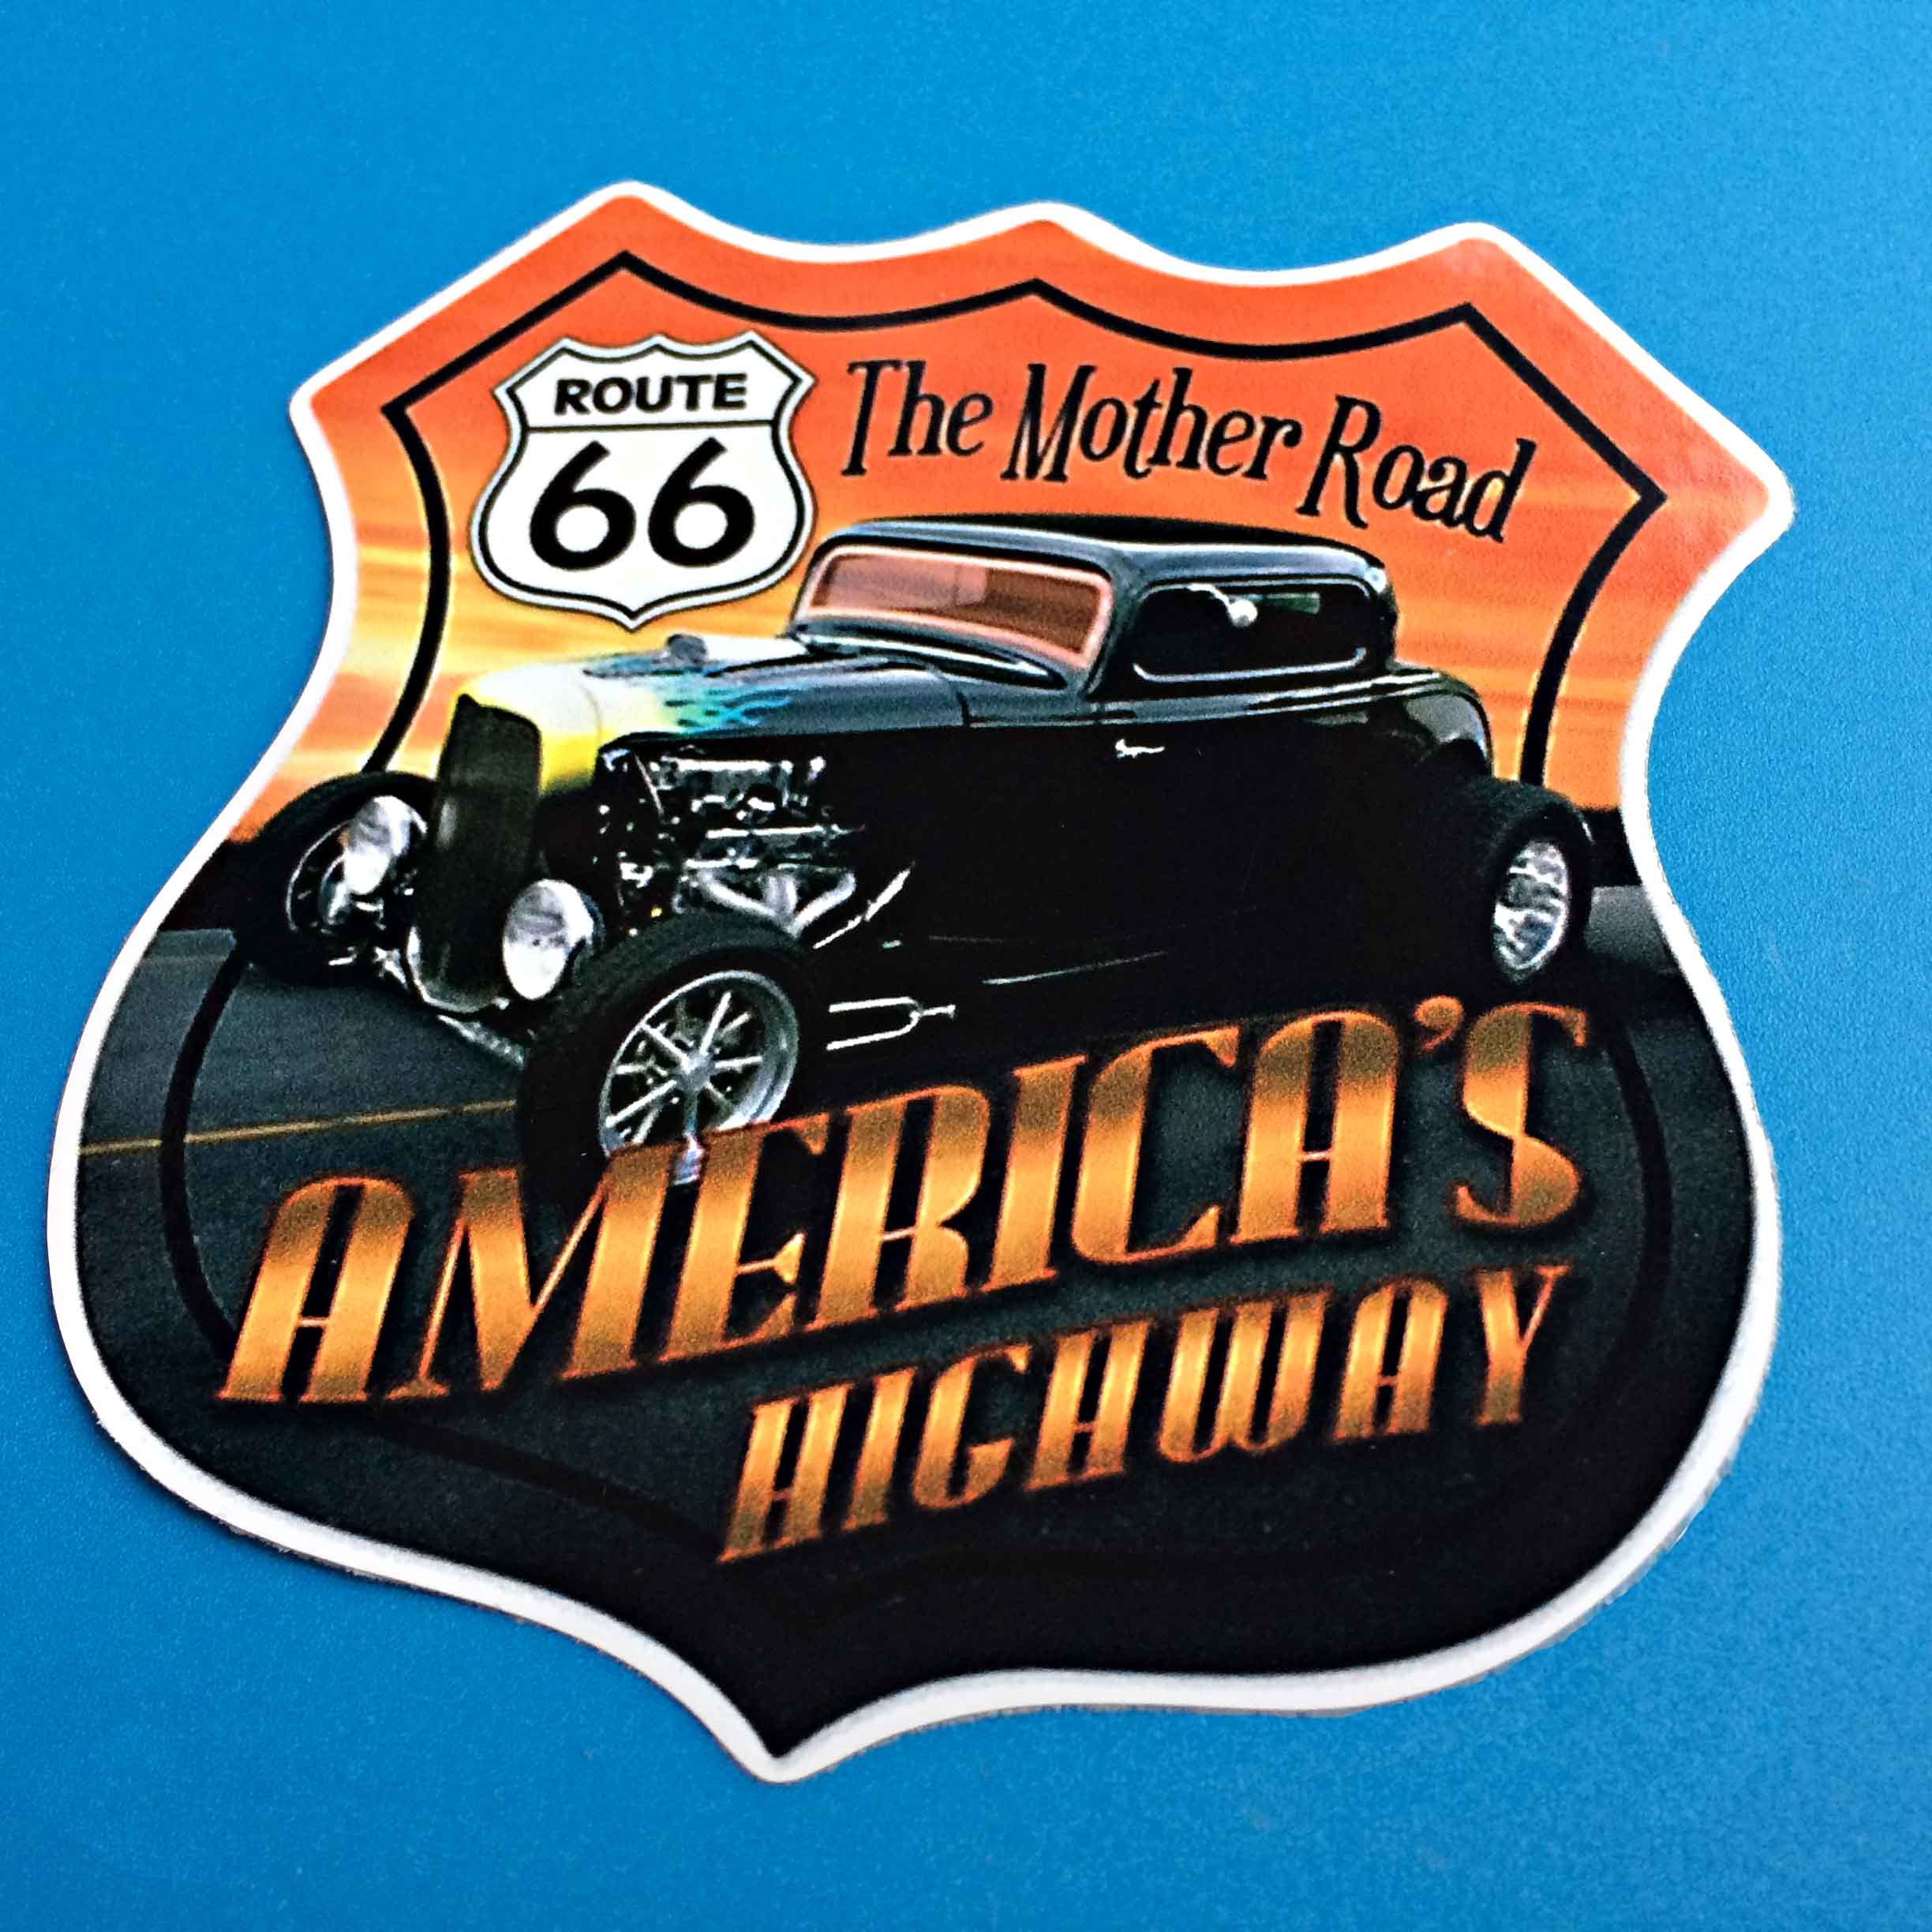 ROUTE 66 AMERICAS HIGHWAY STICKER. Route 66 sign, The Mother Road America's Highway lettering in gold. An American black classic car on the highway at sunset . A Route 66 sign shaped sticker.